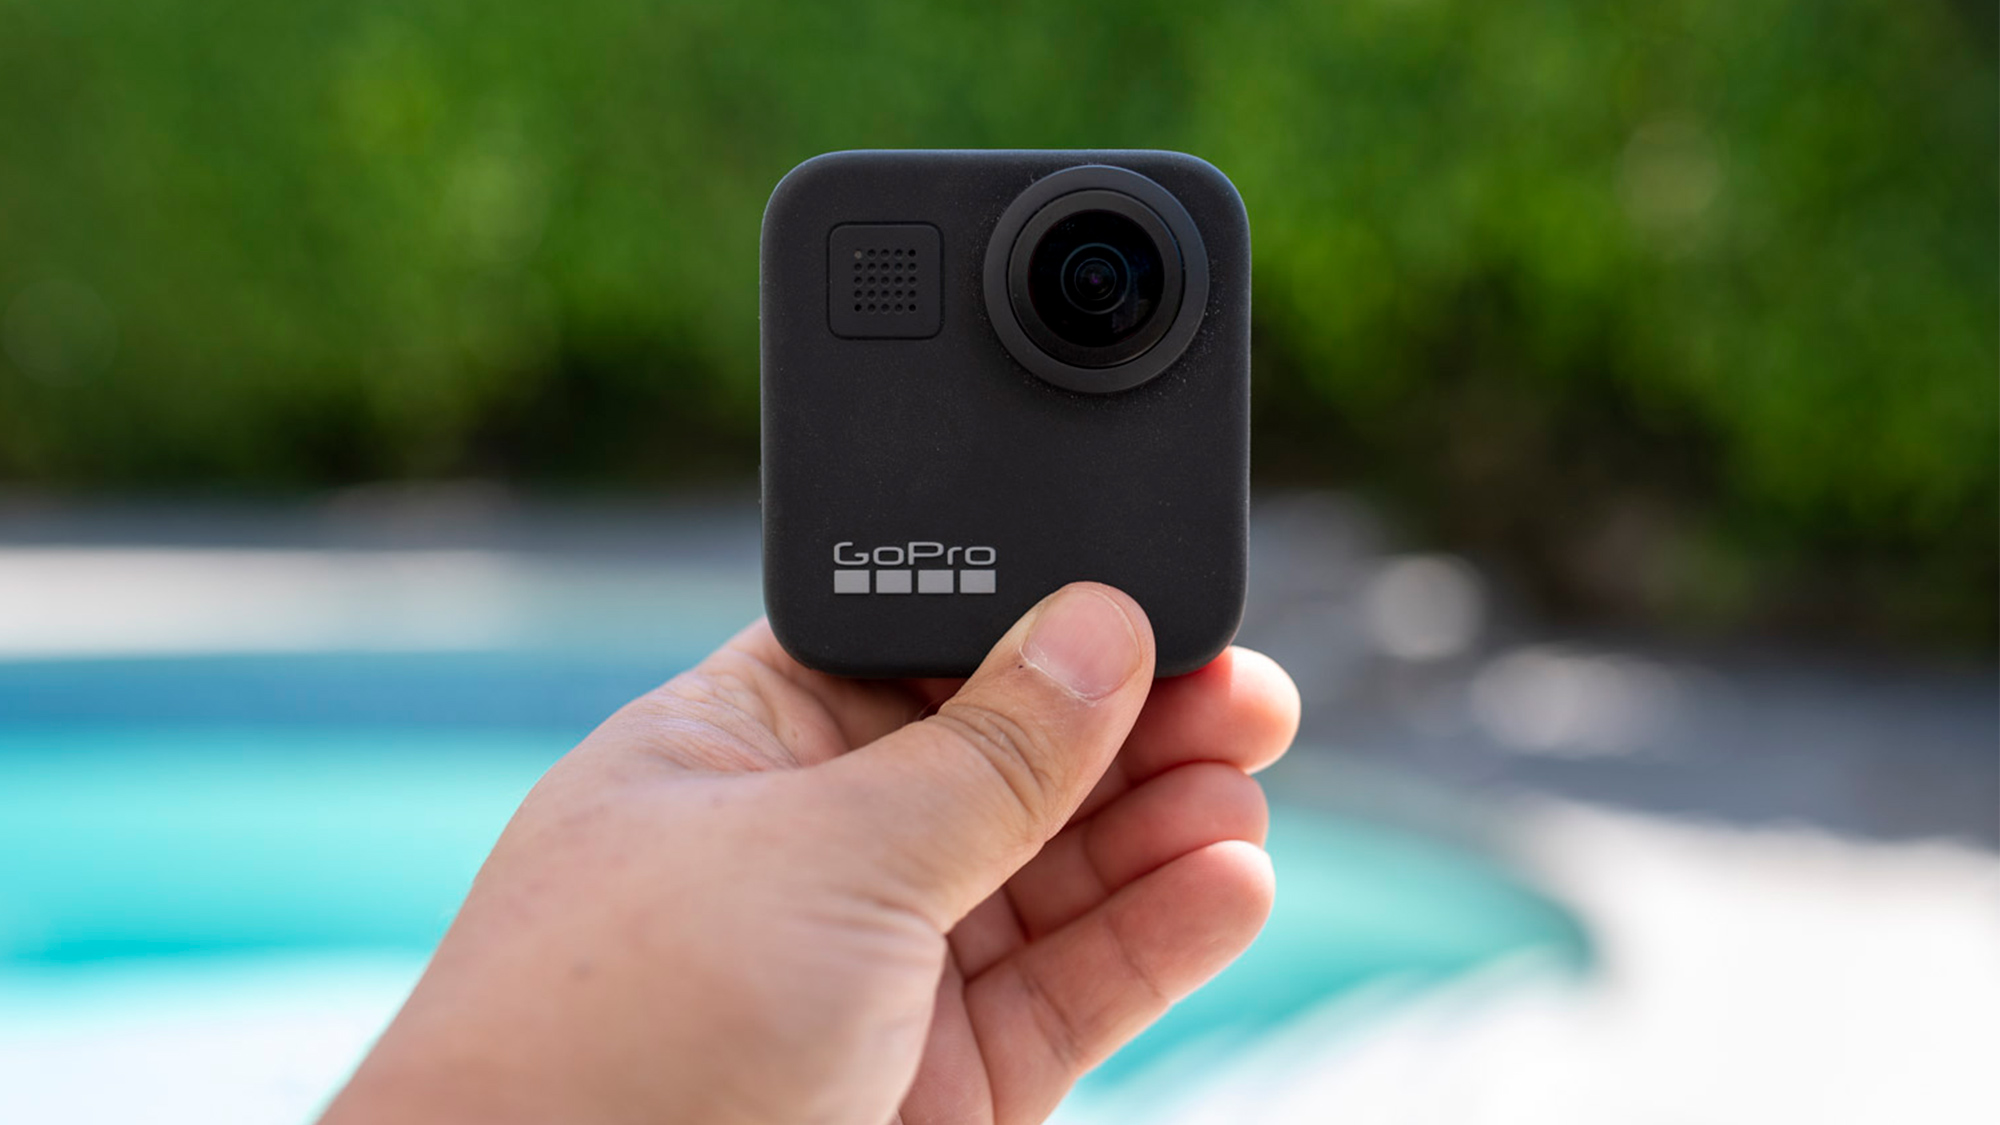 gopro max 360 recording time